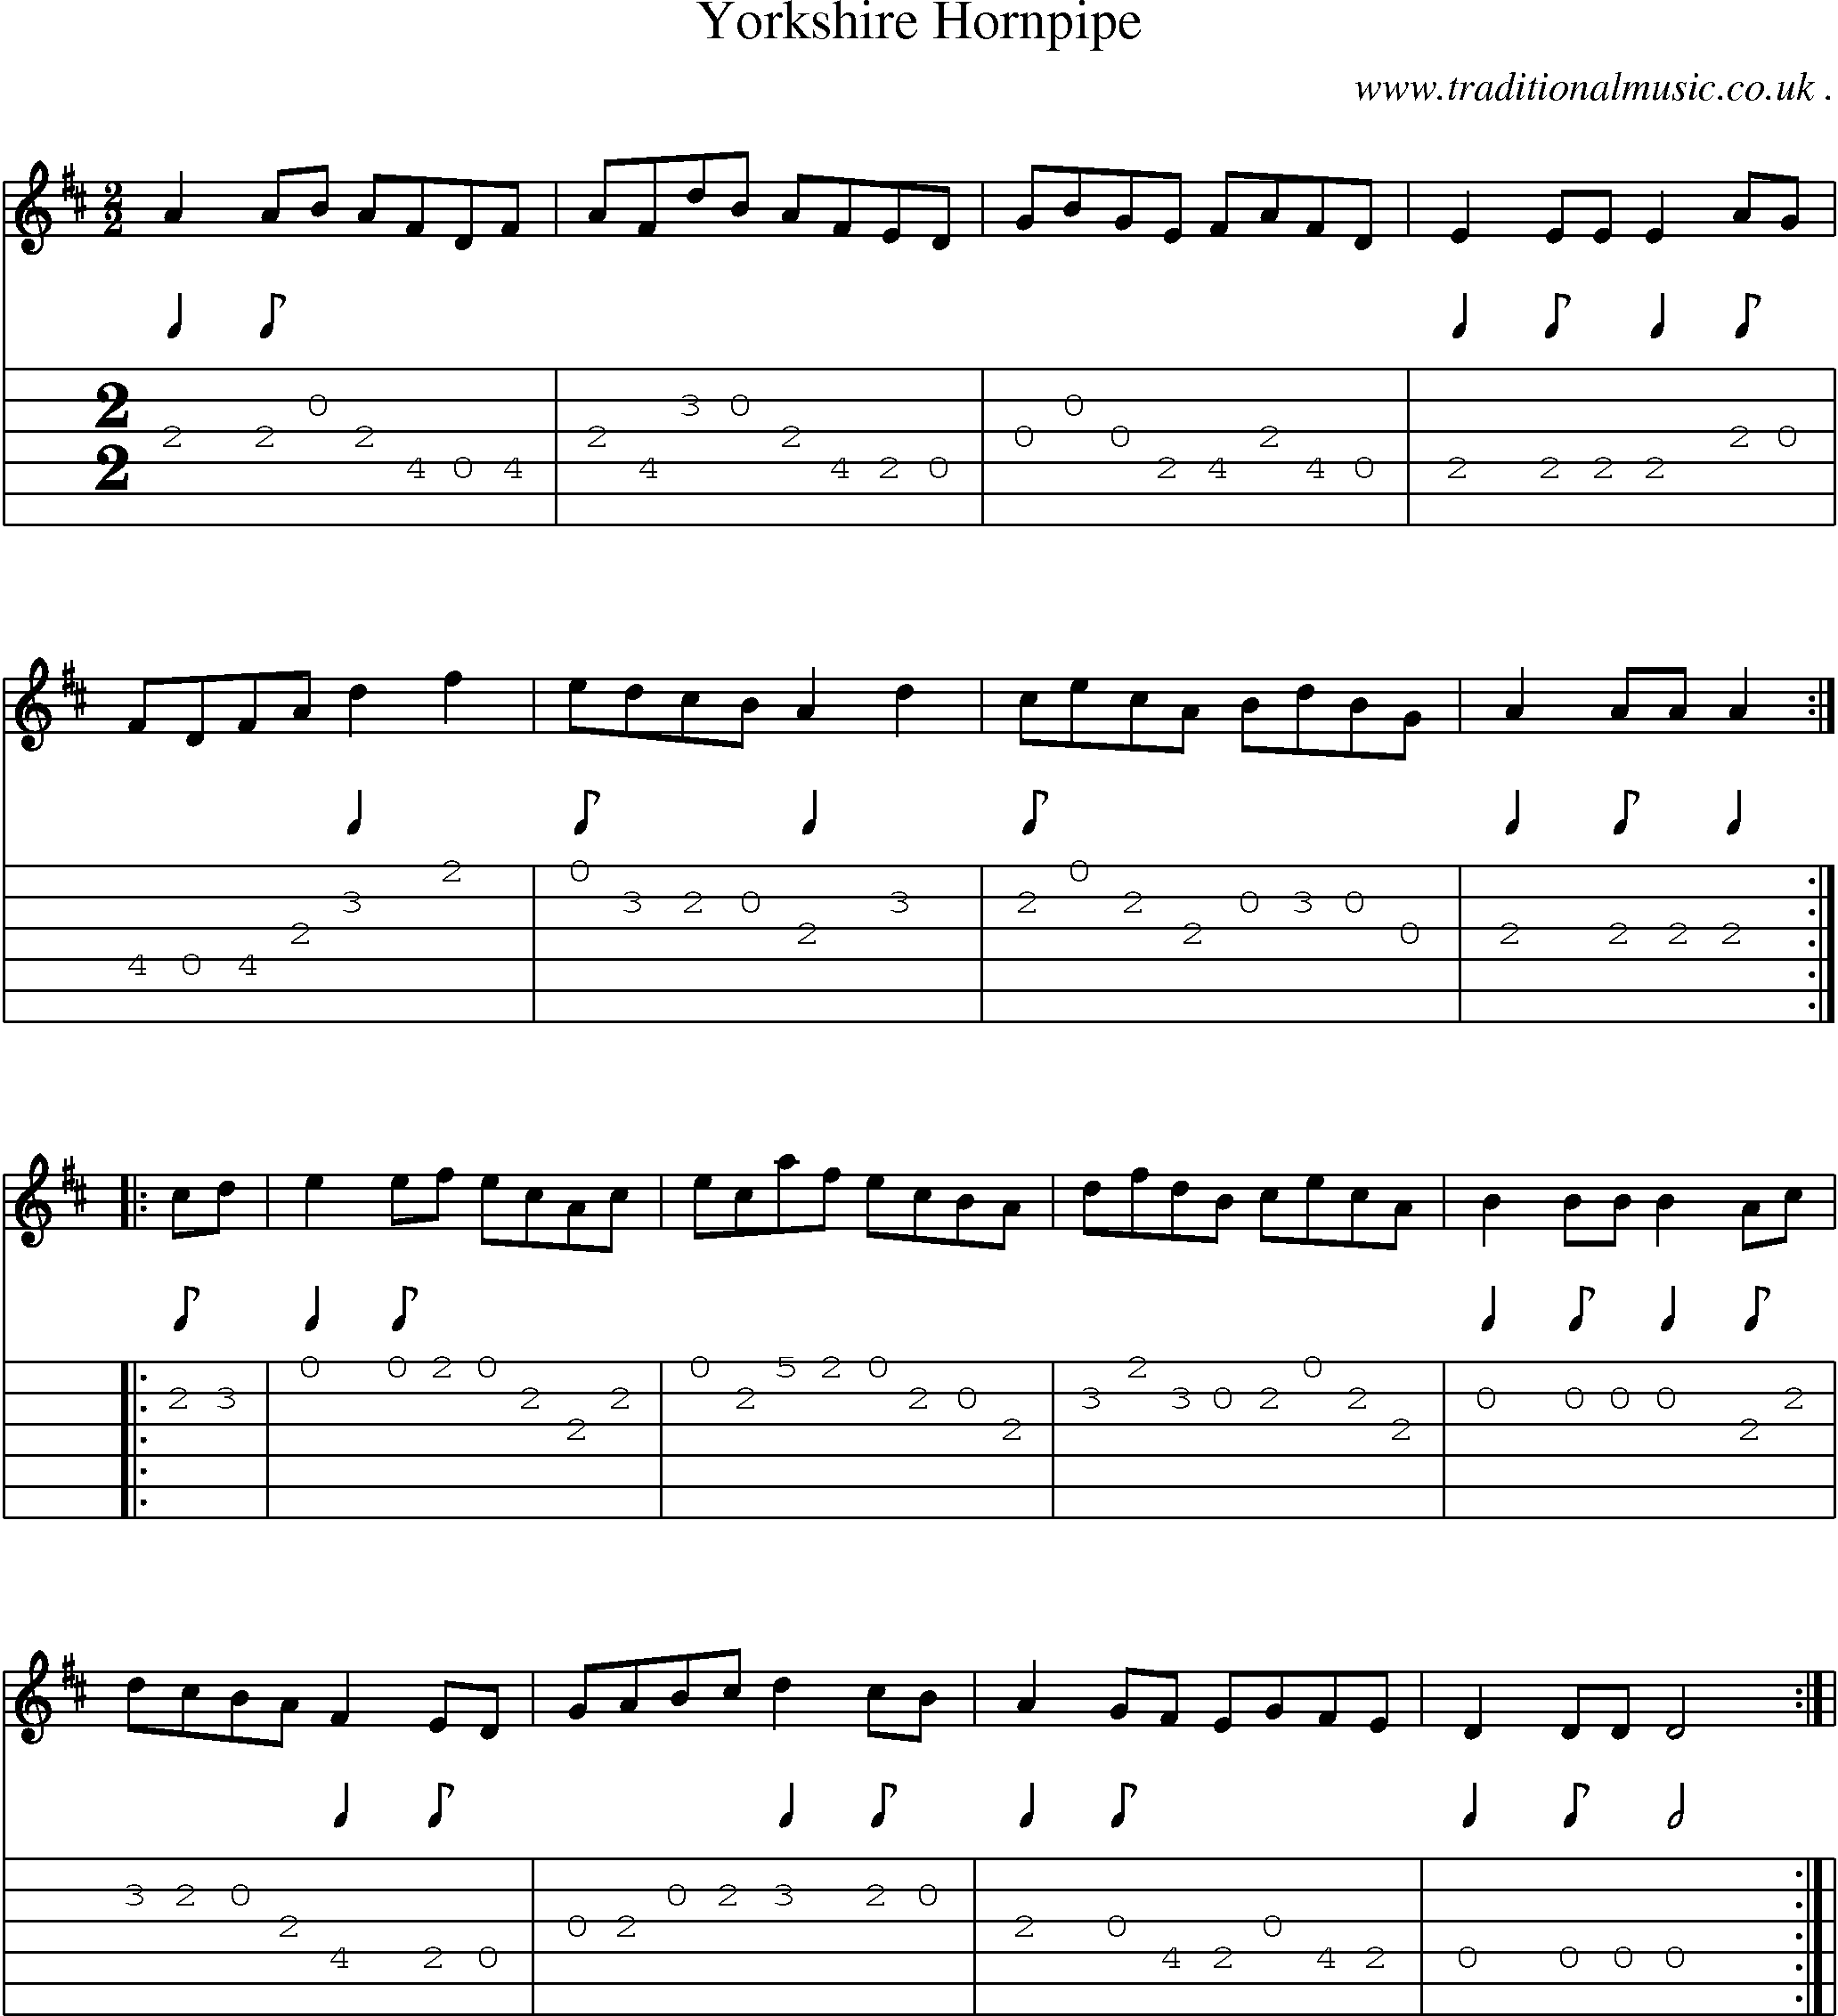 Sheet-Music and Guitar Tabs for Yorkshire Hornpipe